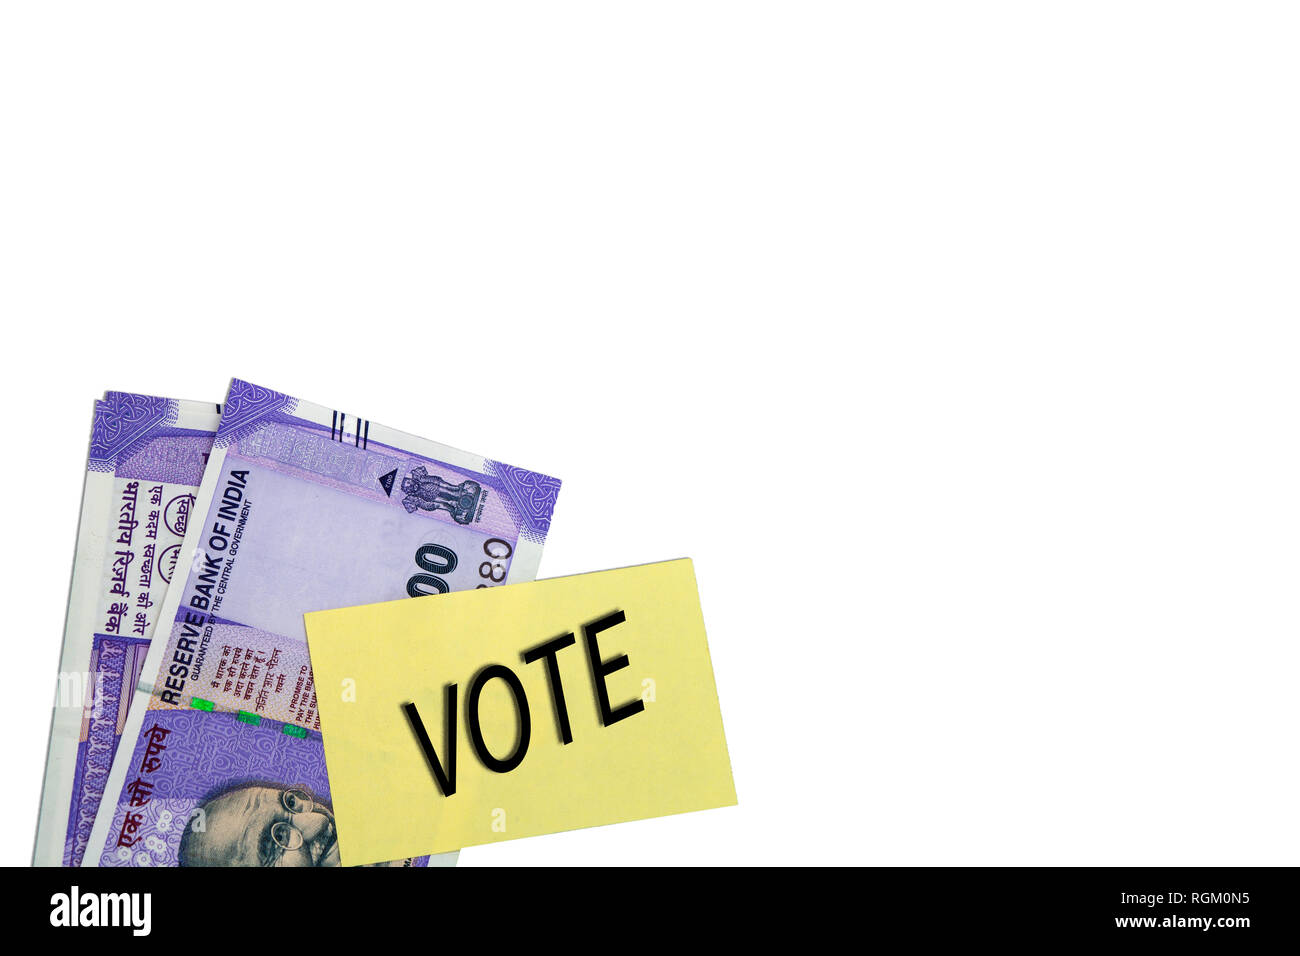 political corruption in India and concept the purchase of votes in elections on isolated background. Stock Photo